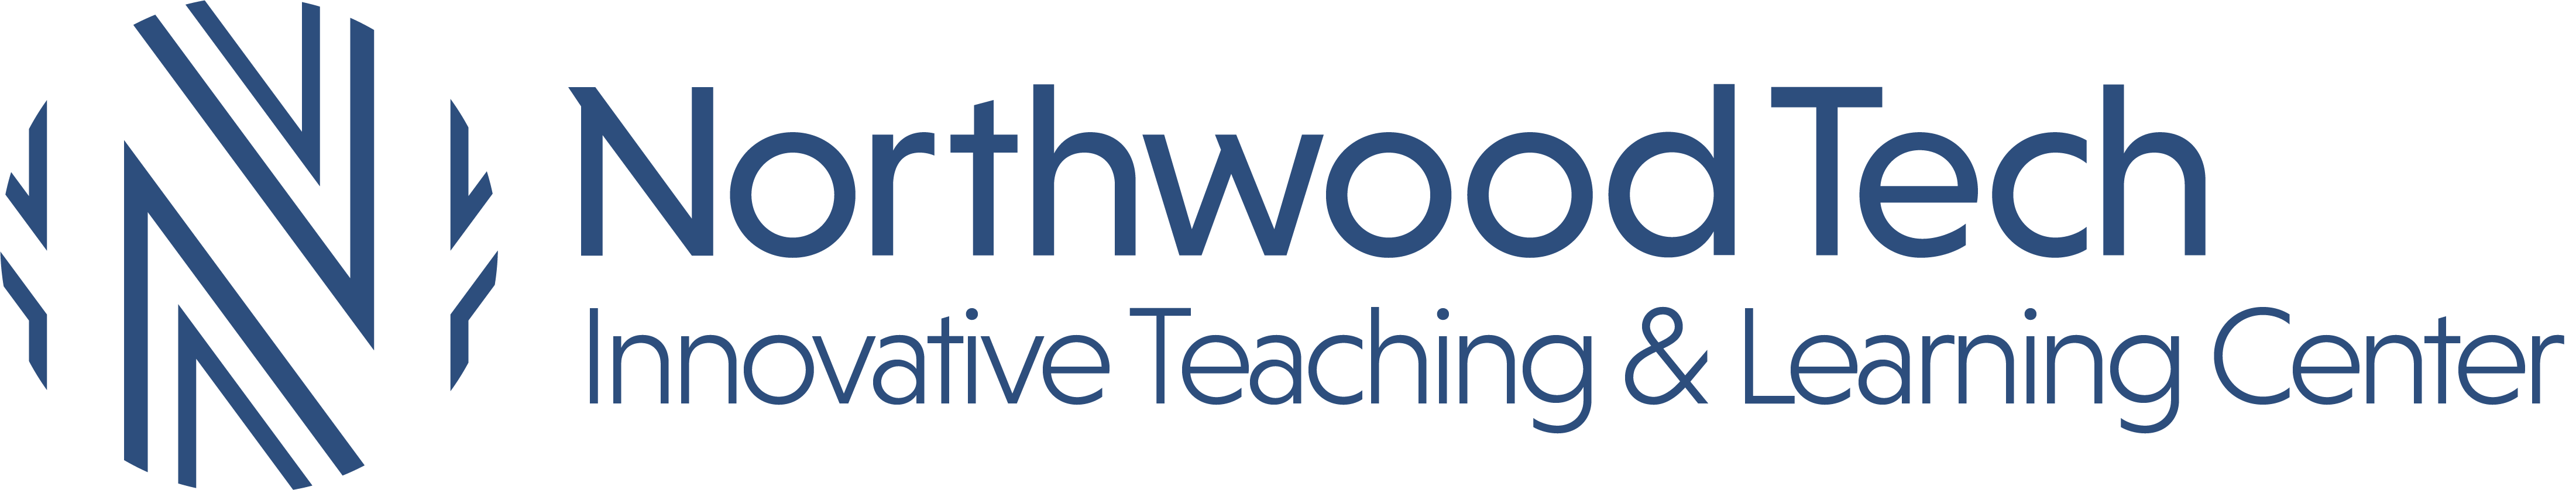 Northwood Tech Innovative Teaching and Learning Center logo